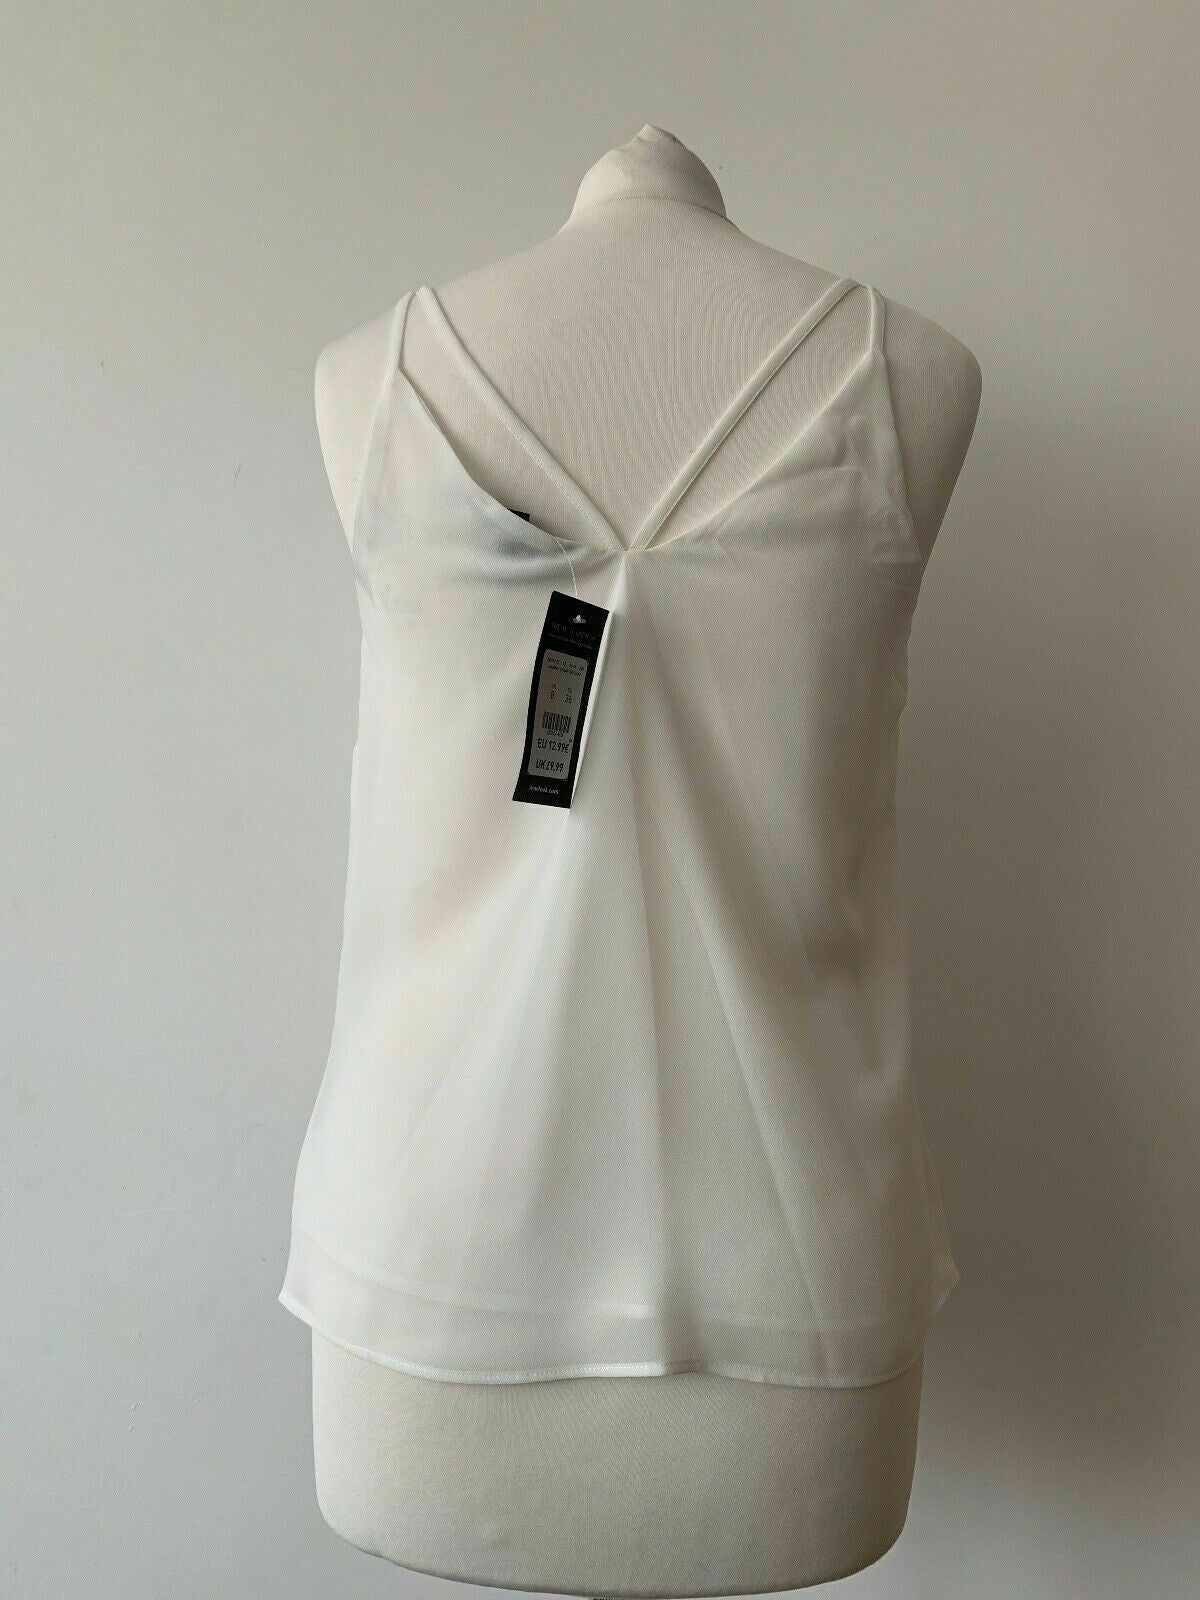 New Look Lined Cami Off White Size 8